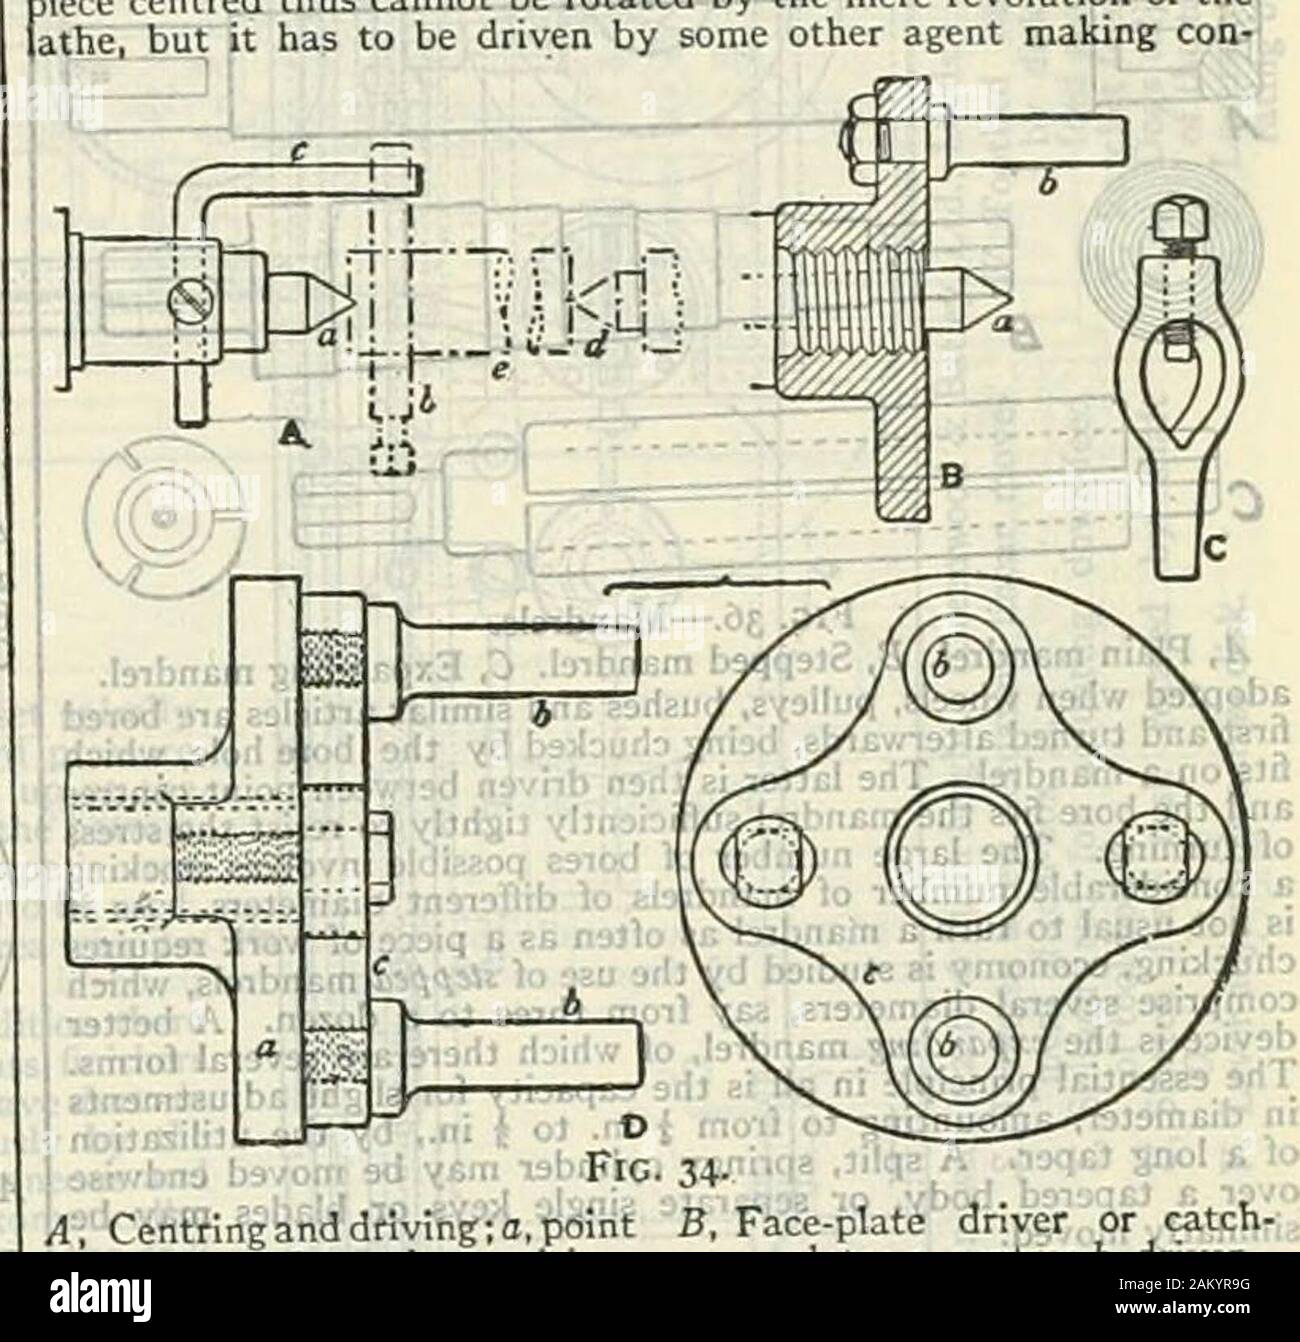 The encyclopædia britannica; a dictionary of arts, sciences, literature and general information . D, Wire-feed tube. E, Slide for closing chuck. F, Shaft for ditto. G, Feed-slide.H, Piece of work./, Turret with box tools..K, Turret sUde.L, Saddle for ditto,  a(ijustable along bed. -  T, M, Screw for locating adjirstablfe   slide.N, Cut-of! and forming cross-slide. ? v.0, O, Backand front tool-holderson slidi P, Cam shaft. Q, Cam drum fc chuck.R, Carn drum fc turret.S, Cam disk for cross-slide. operatingoperating a. a, a, Cams for actuating chuckmovements through pinsb, b. The cam which re-tu Stock Photo